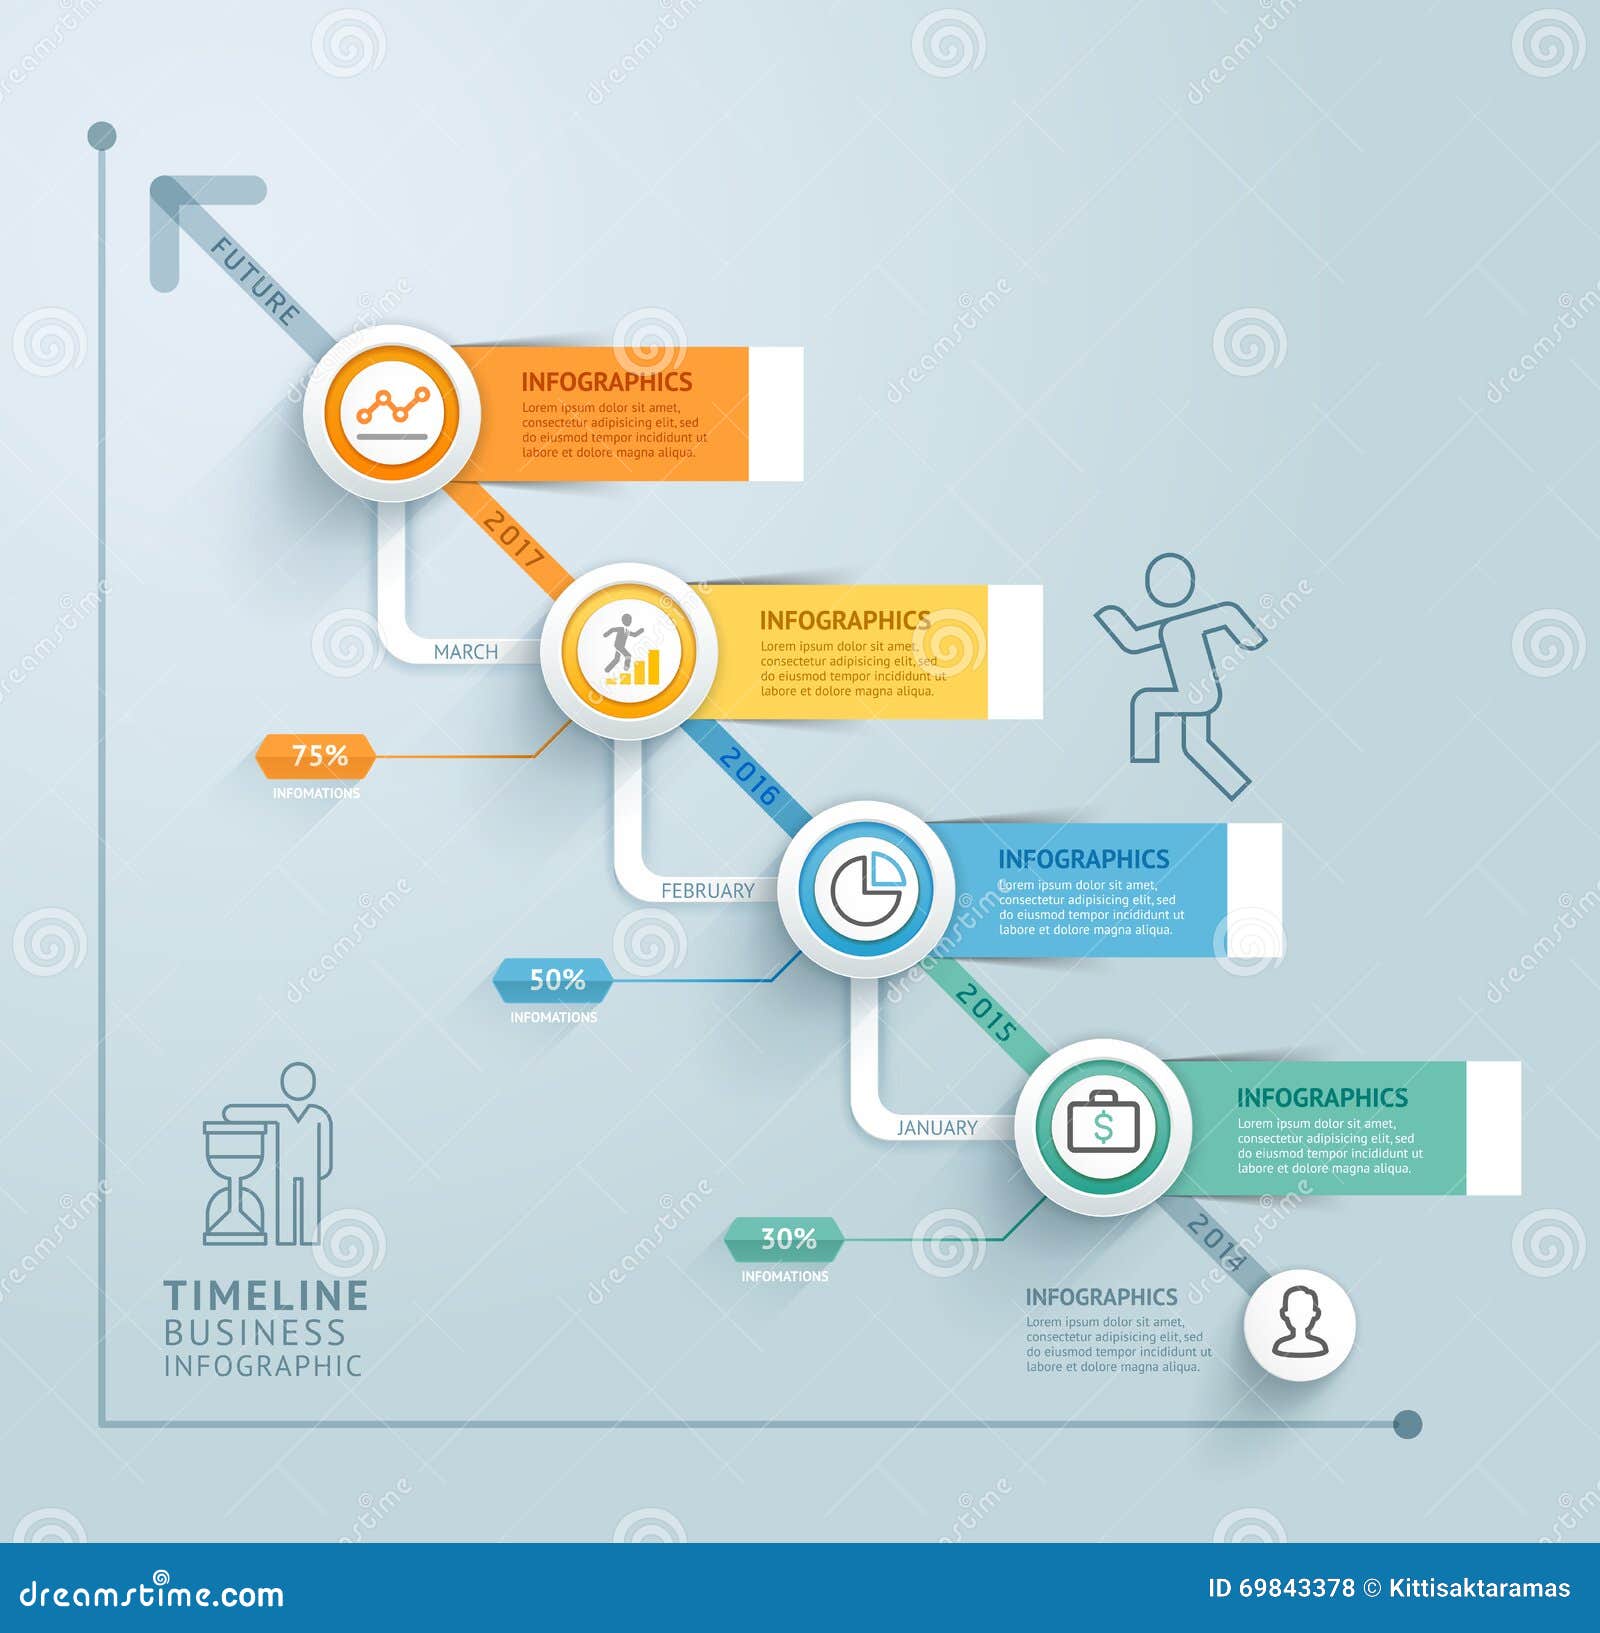 business timeline info graphic template.  .